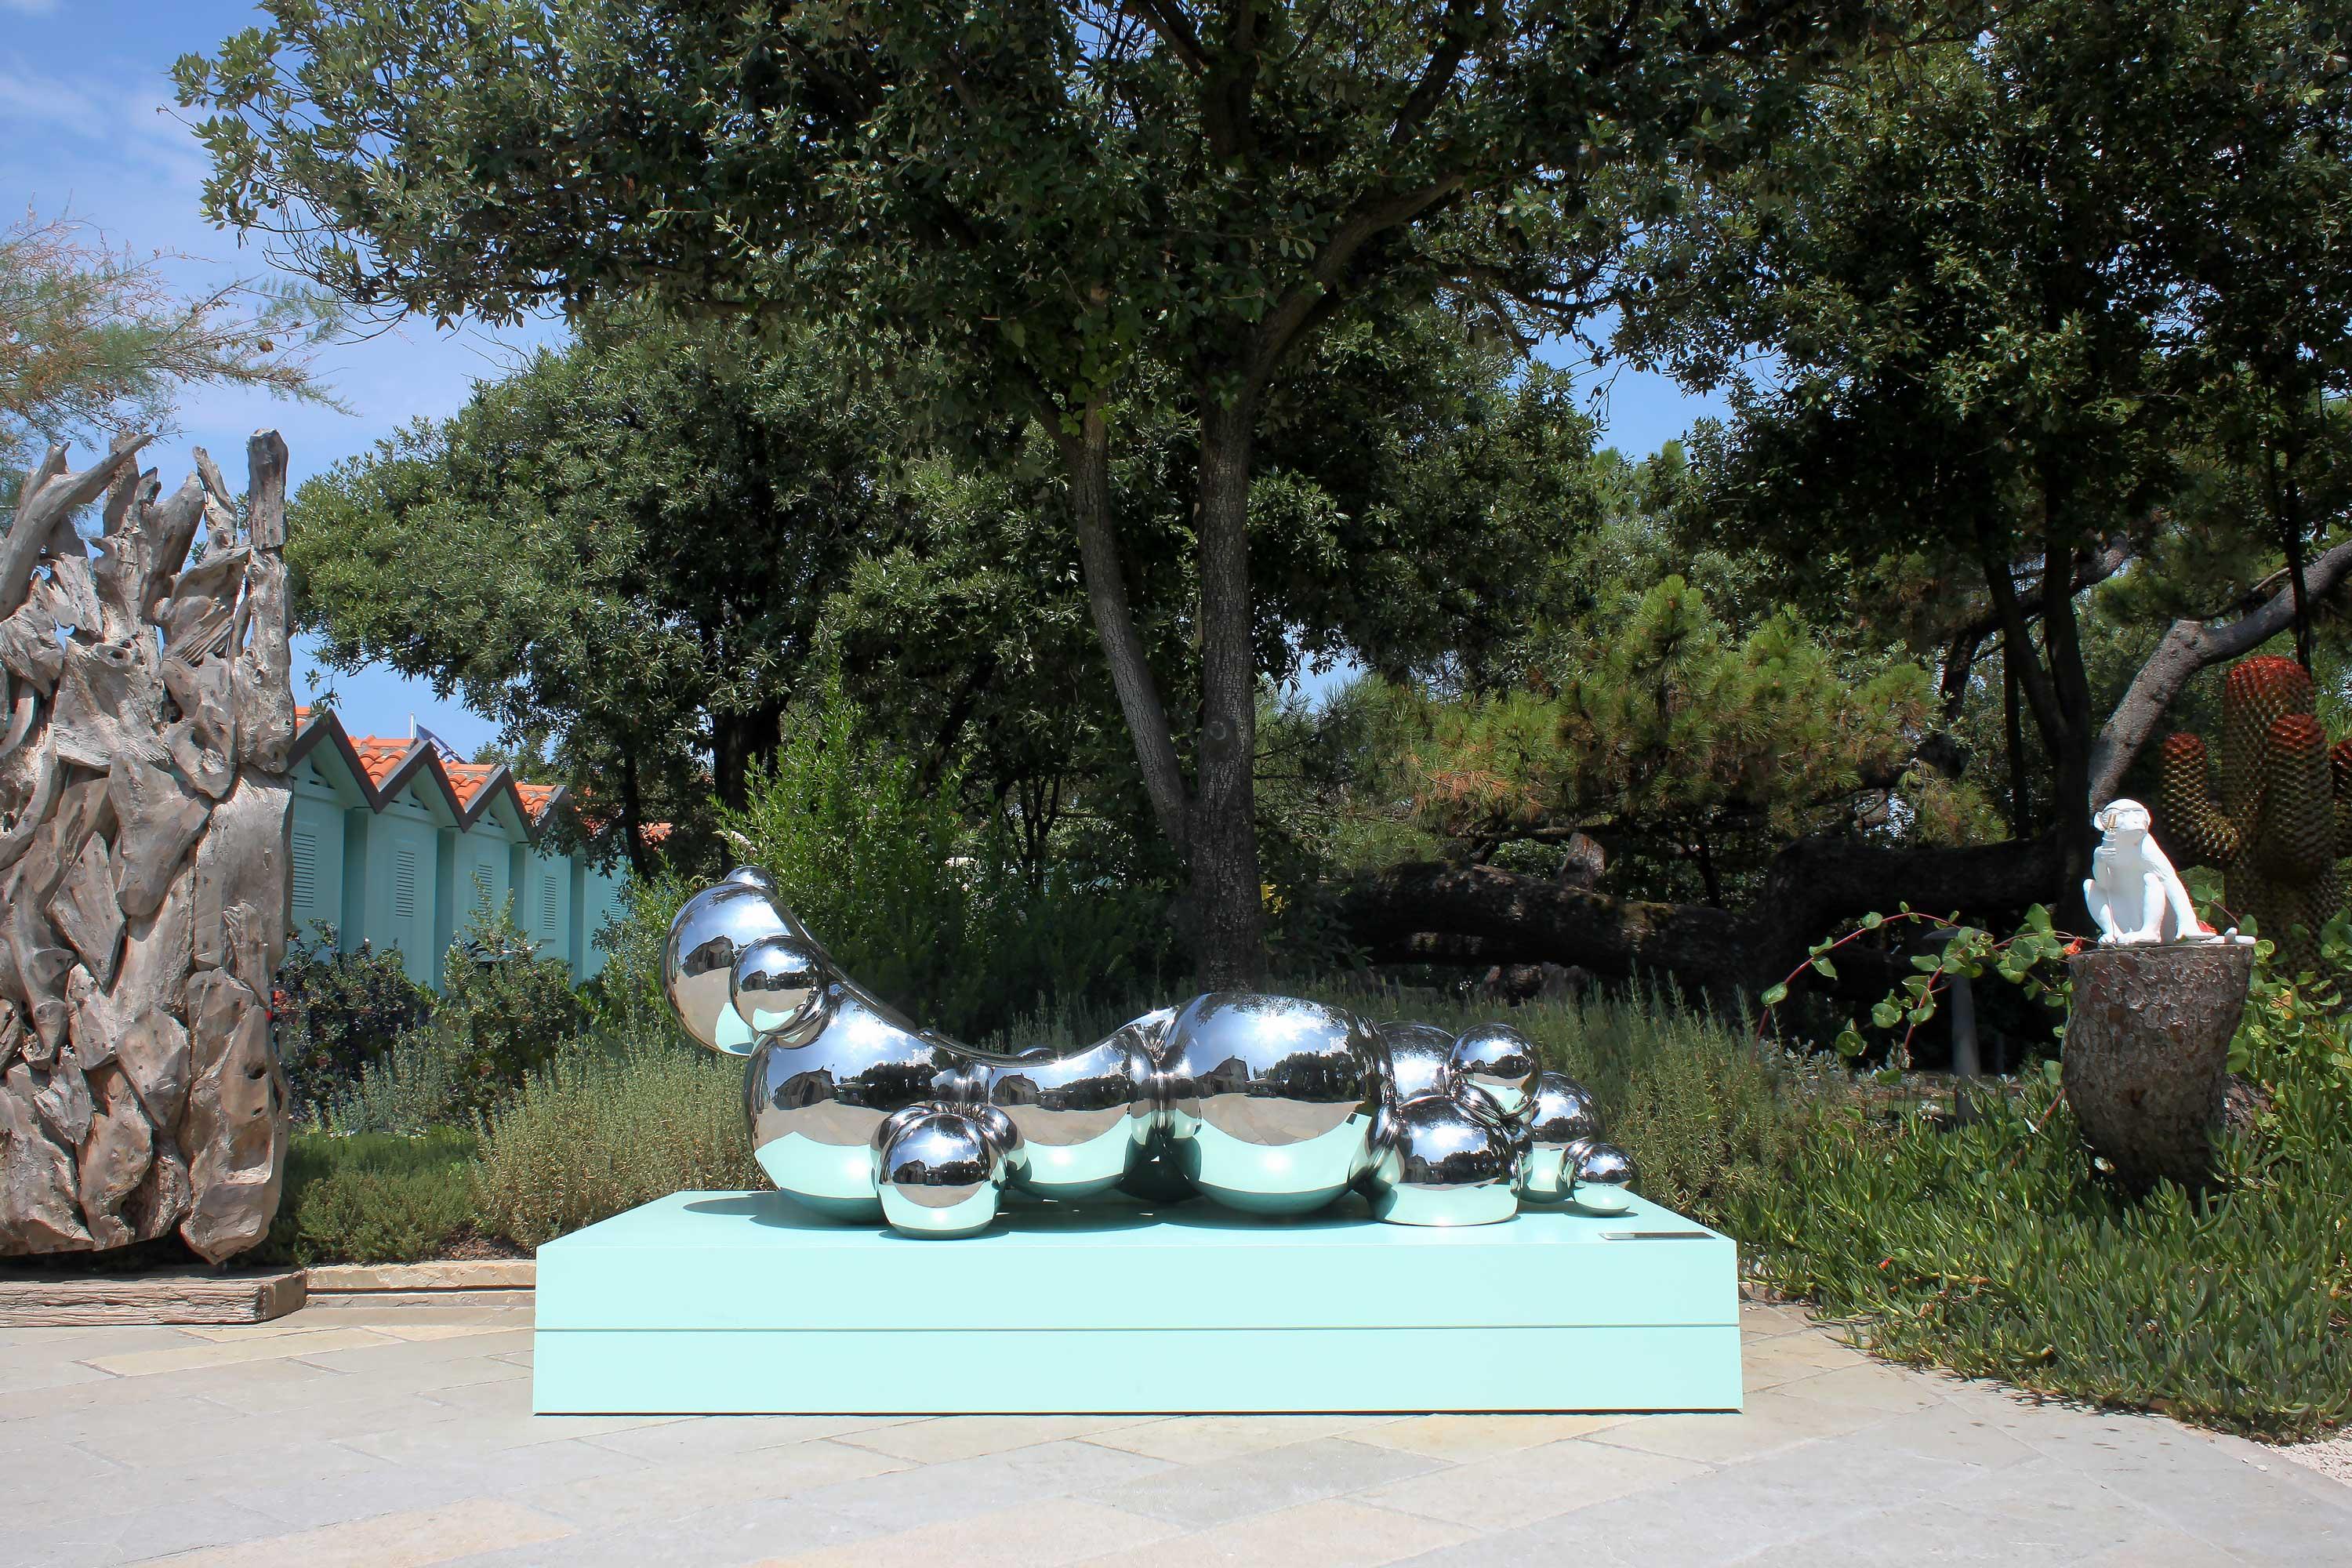 The sculptural chaise longue 'Golem' is an imposing sculpture, made up of hollow stainless steel spheres, welded one by one by hand and mirror polished. A sinuous top cuts the group of spheres creating the chaise longue, on which you can lie down.